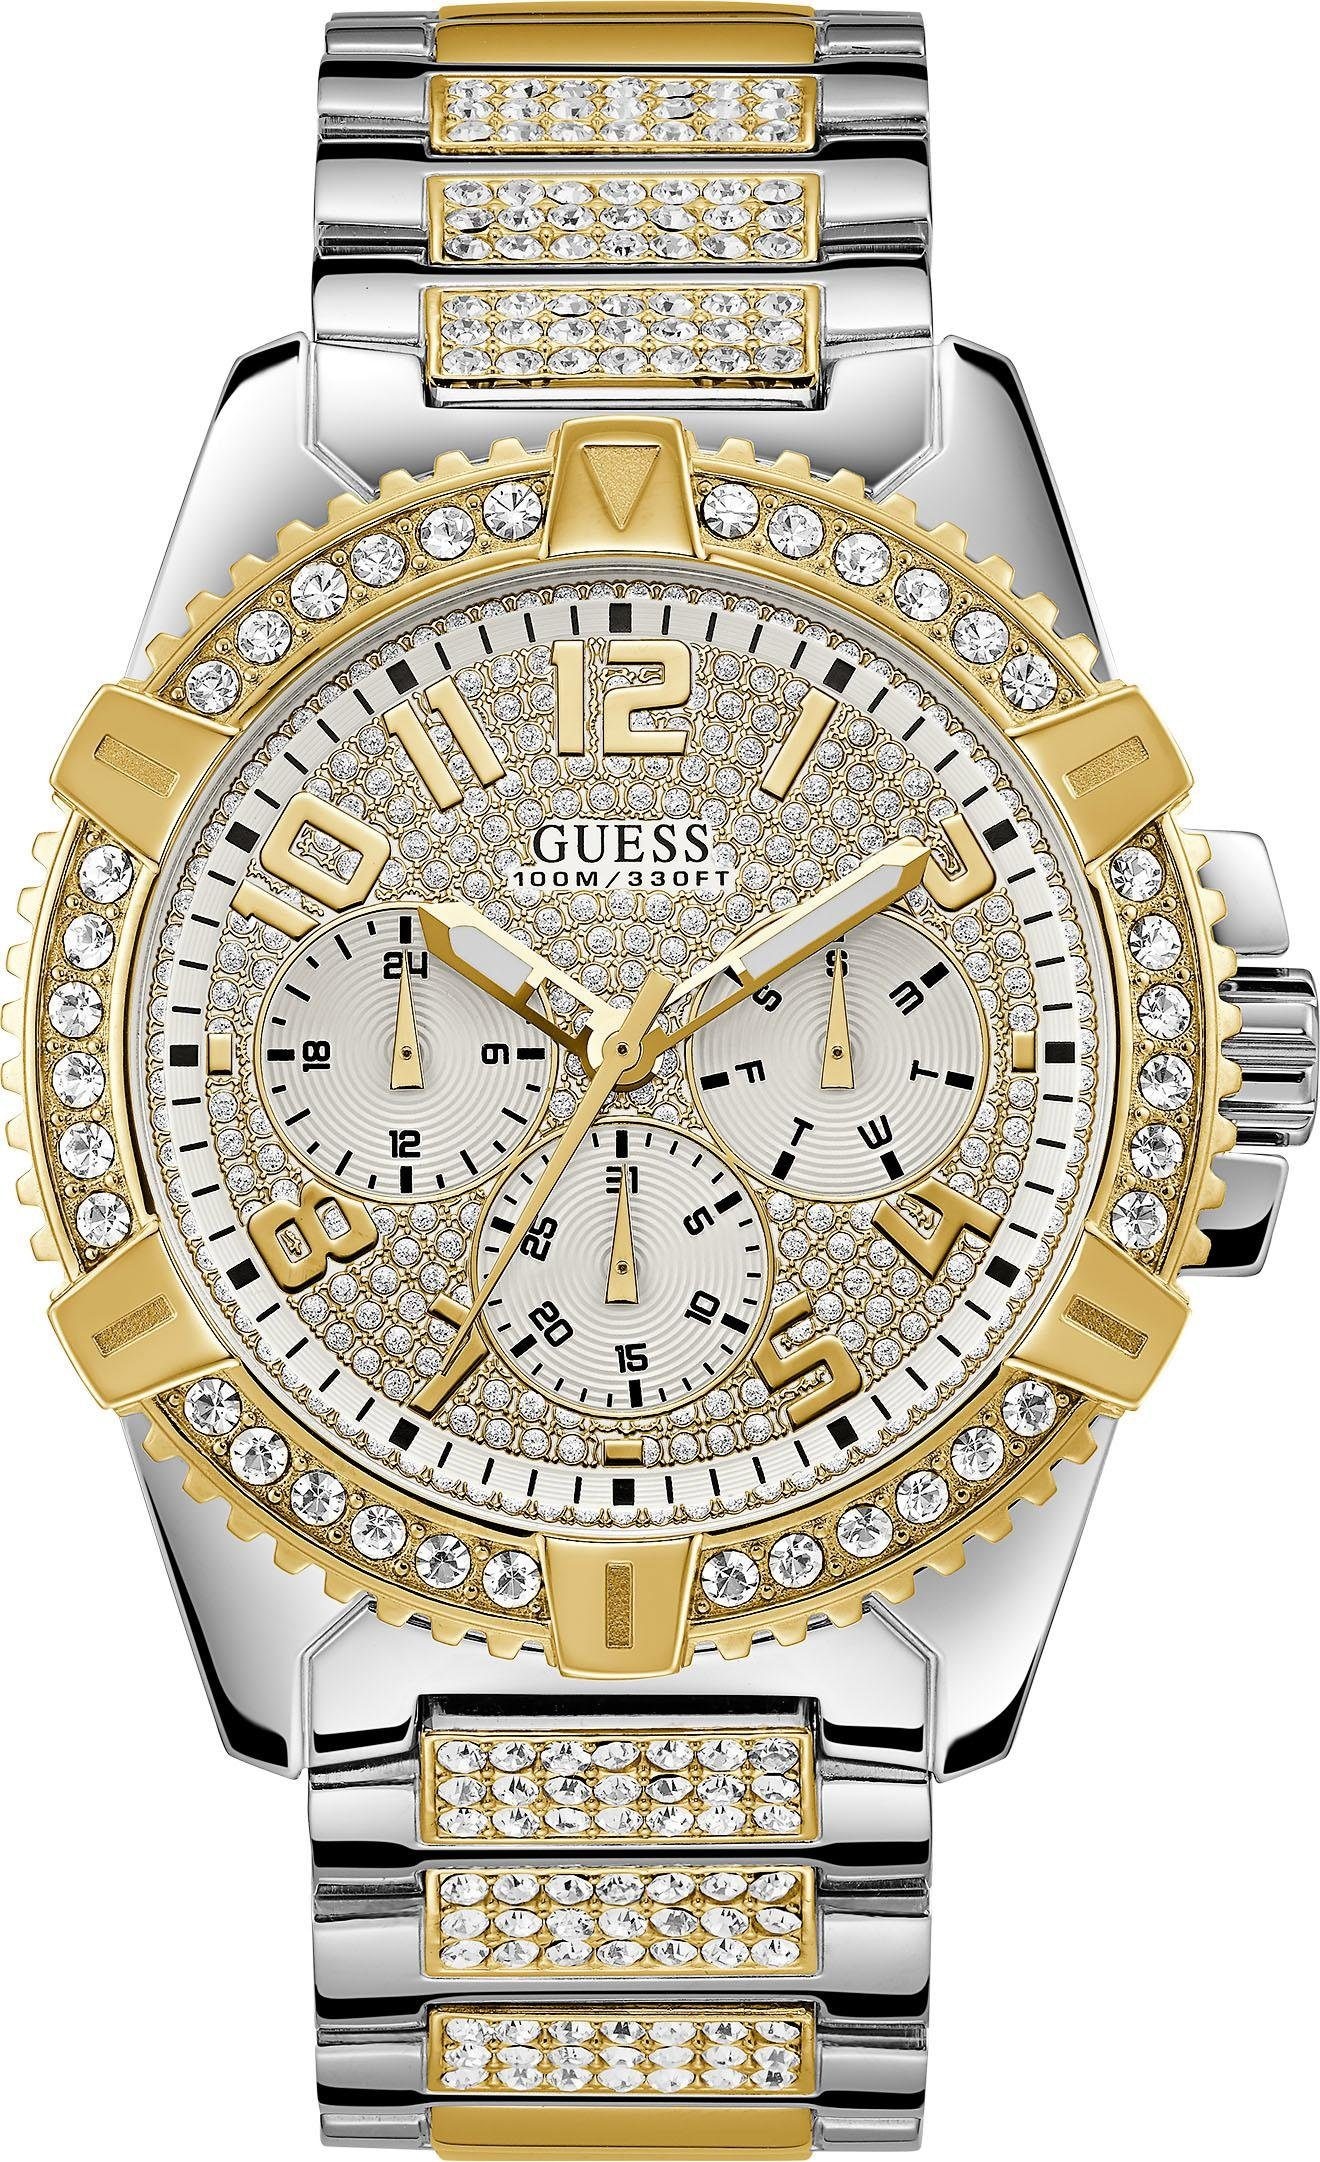 Black Friday Guess Multifunktionsuhr BAUR »FRONTIER, W0799G4« 